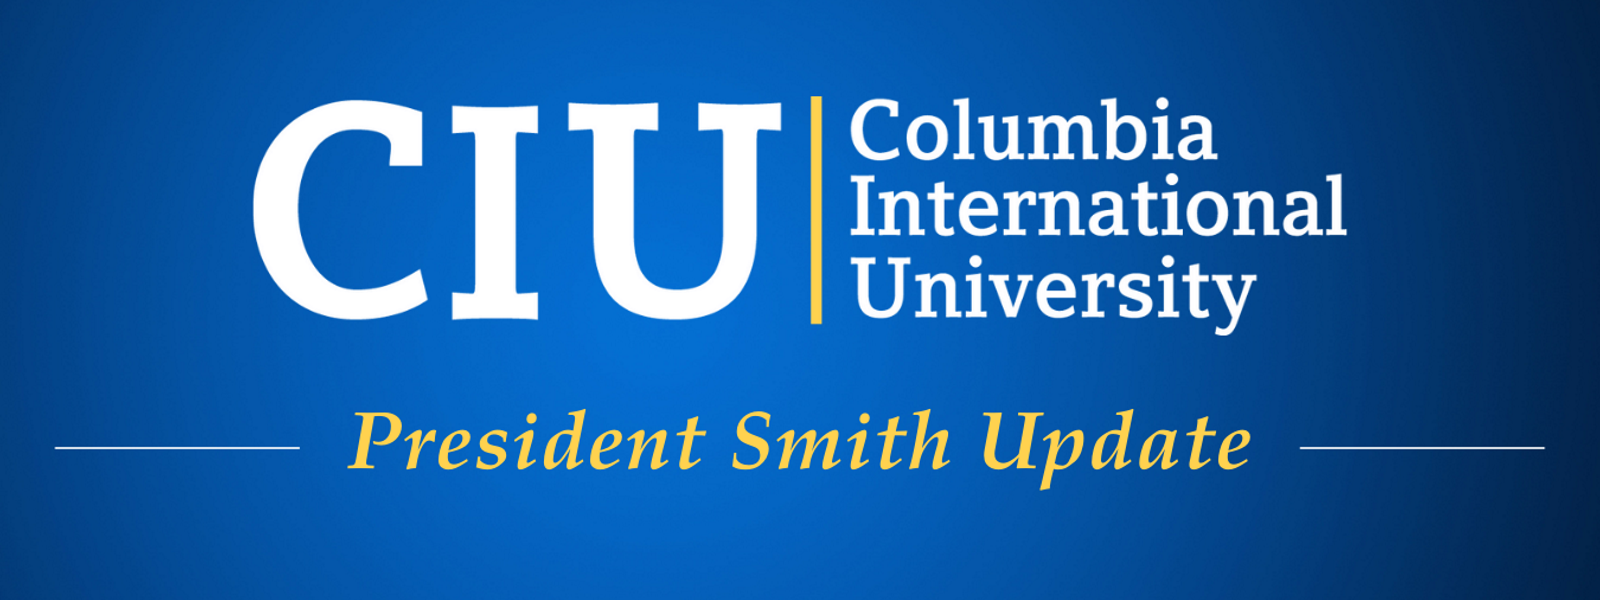 CIU Logo above the title "President Smith Update"